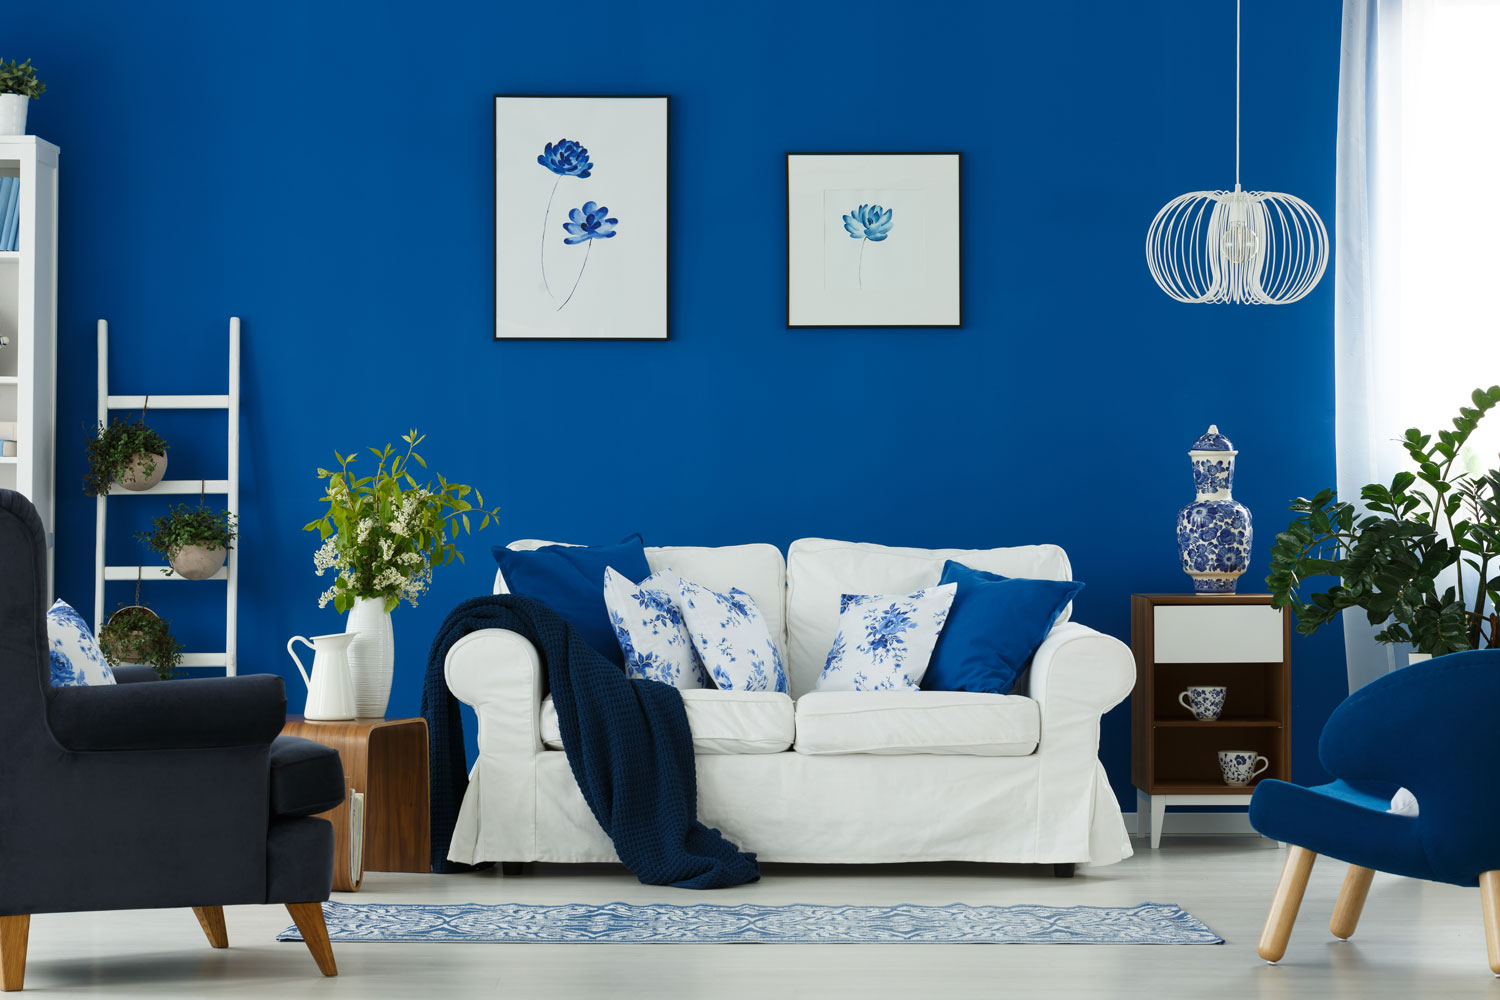 Interior of a blue and white themed living room and incorporated with blue throw pillows